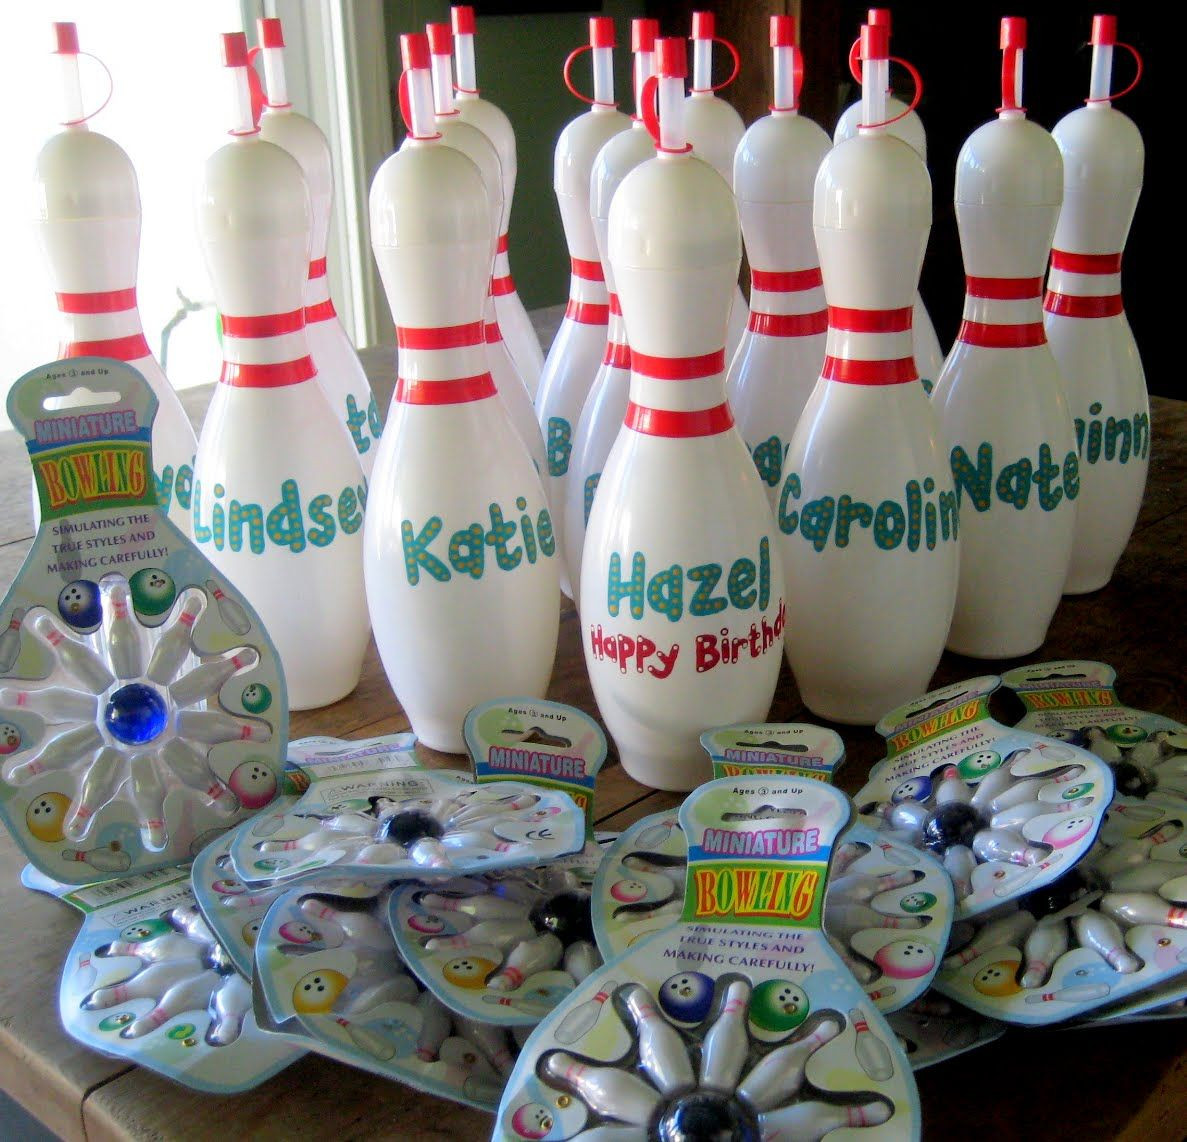 Bowling Party Favors For Kids
 Google Image Result for